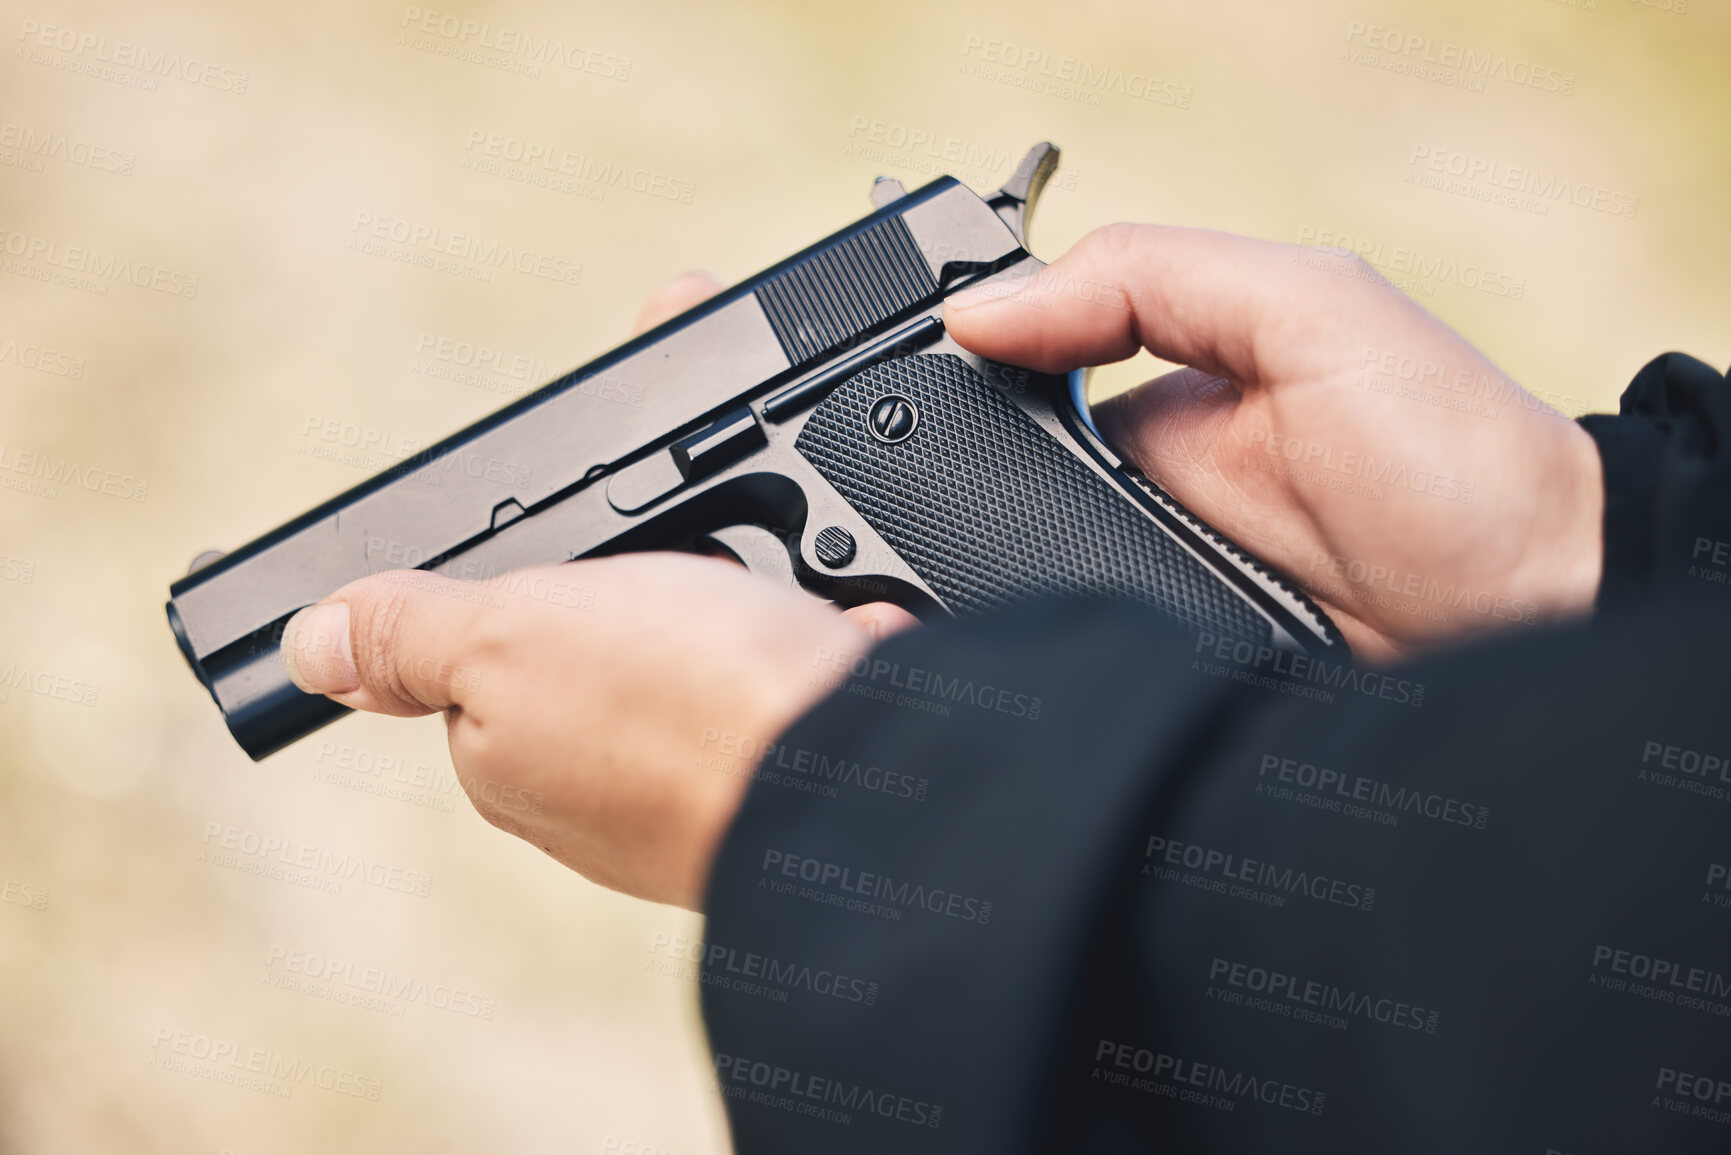 Buy stock photo Weapon, pistol and hands with gun outdoor for police, military and safety training at firing range. Security, danger and person holding metal firearm for criminal protection, shooting and fight crime